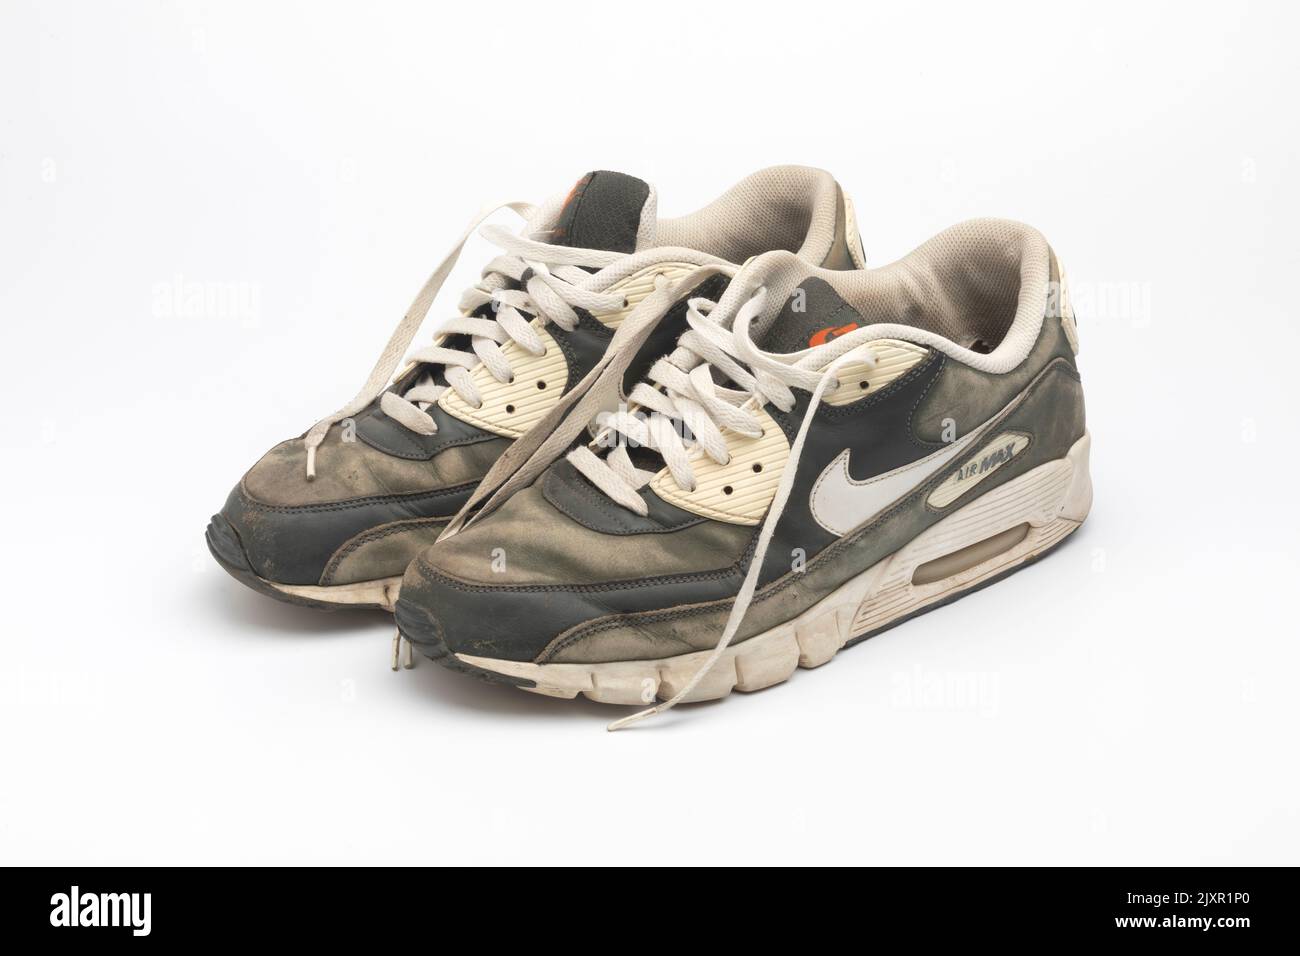 An old, dirty, worn and faded pair of Nike Air Max trainers Stock Photo